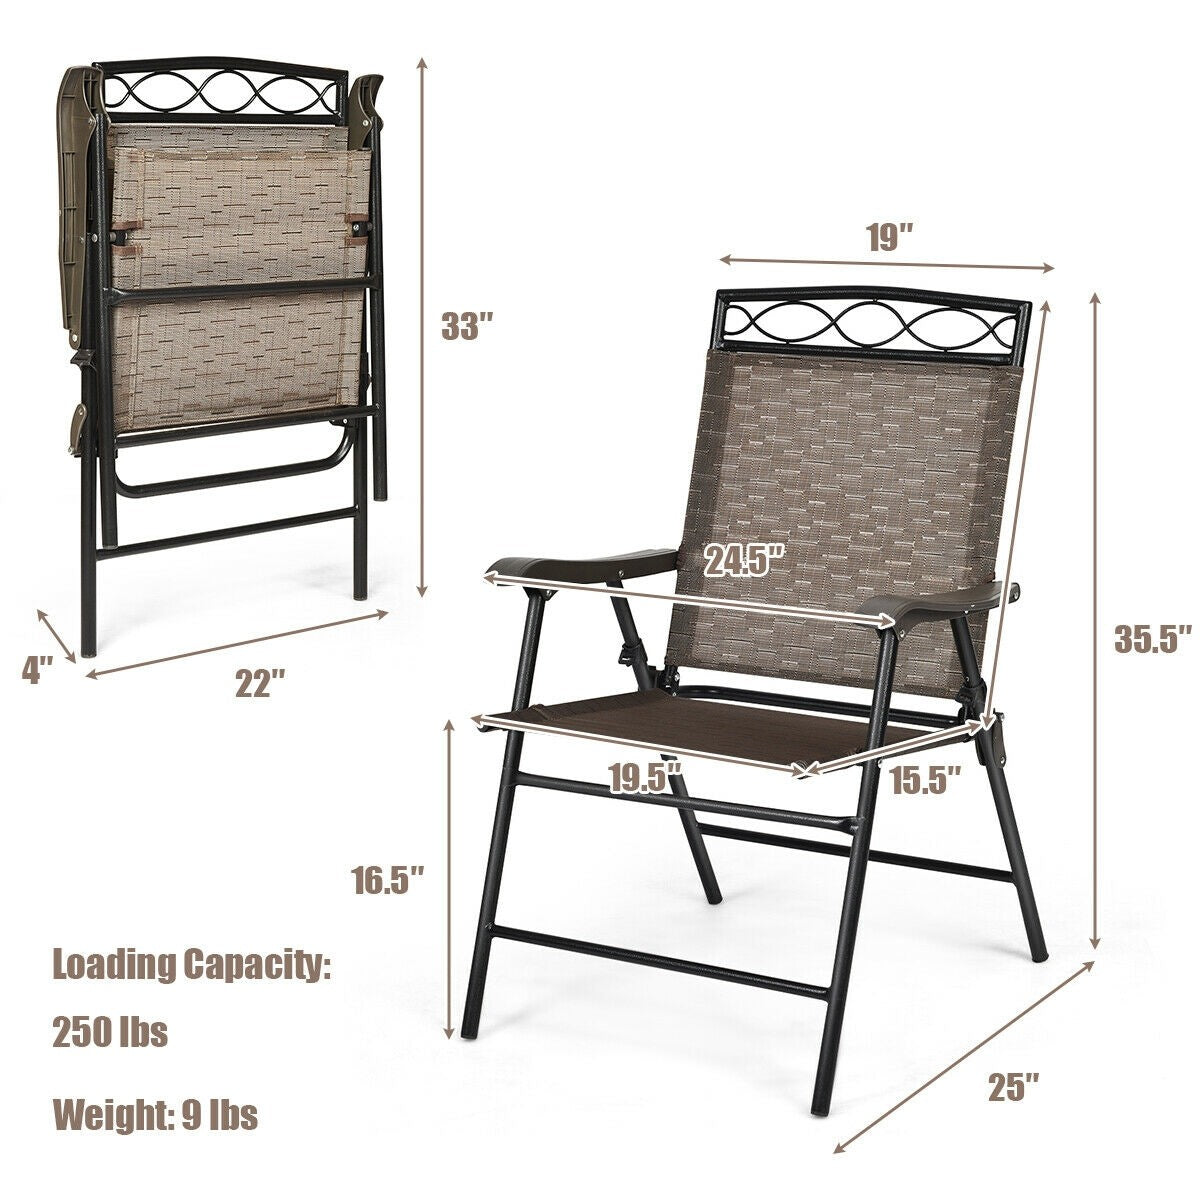 Set of 2 or 4 Patio Chairs, Outdoor Folding Lawn Chairs for Beach